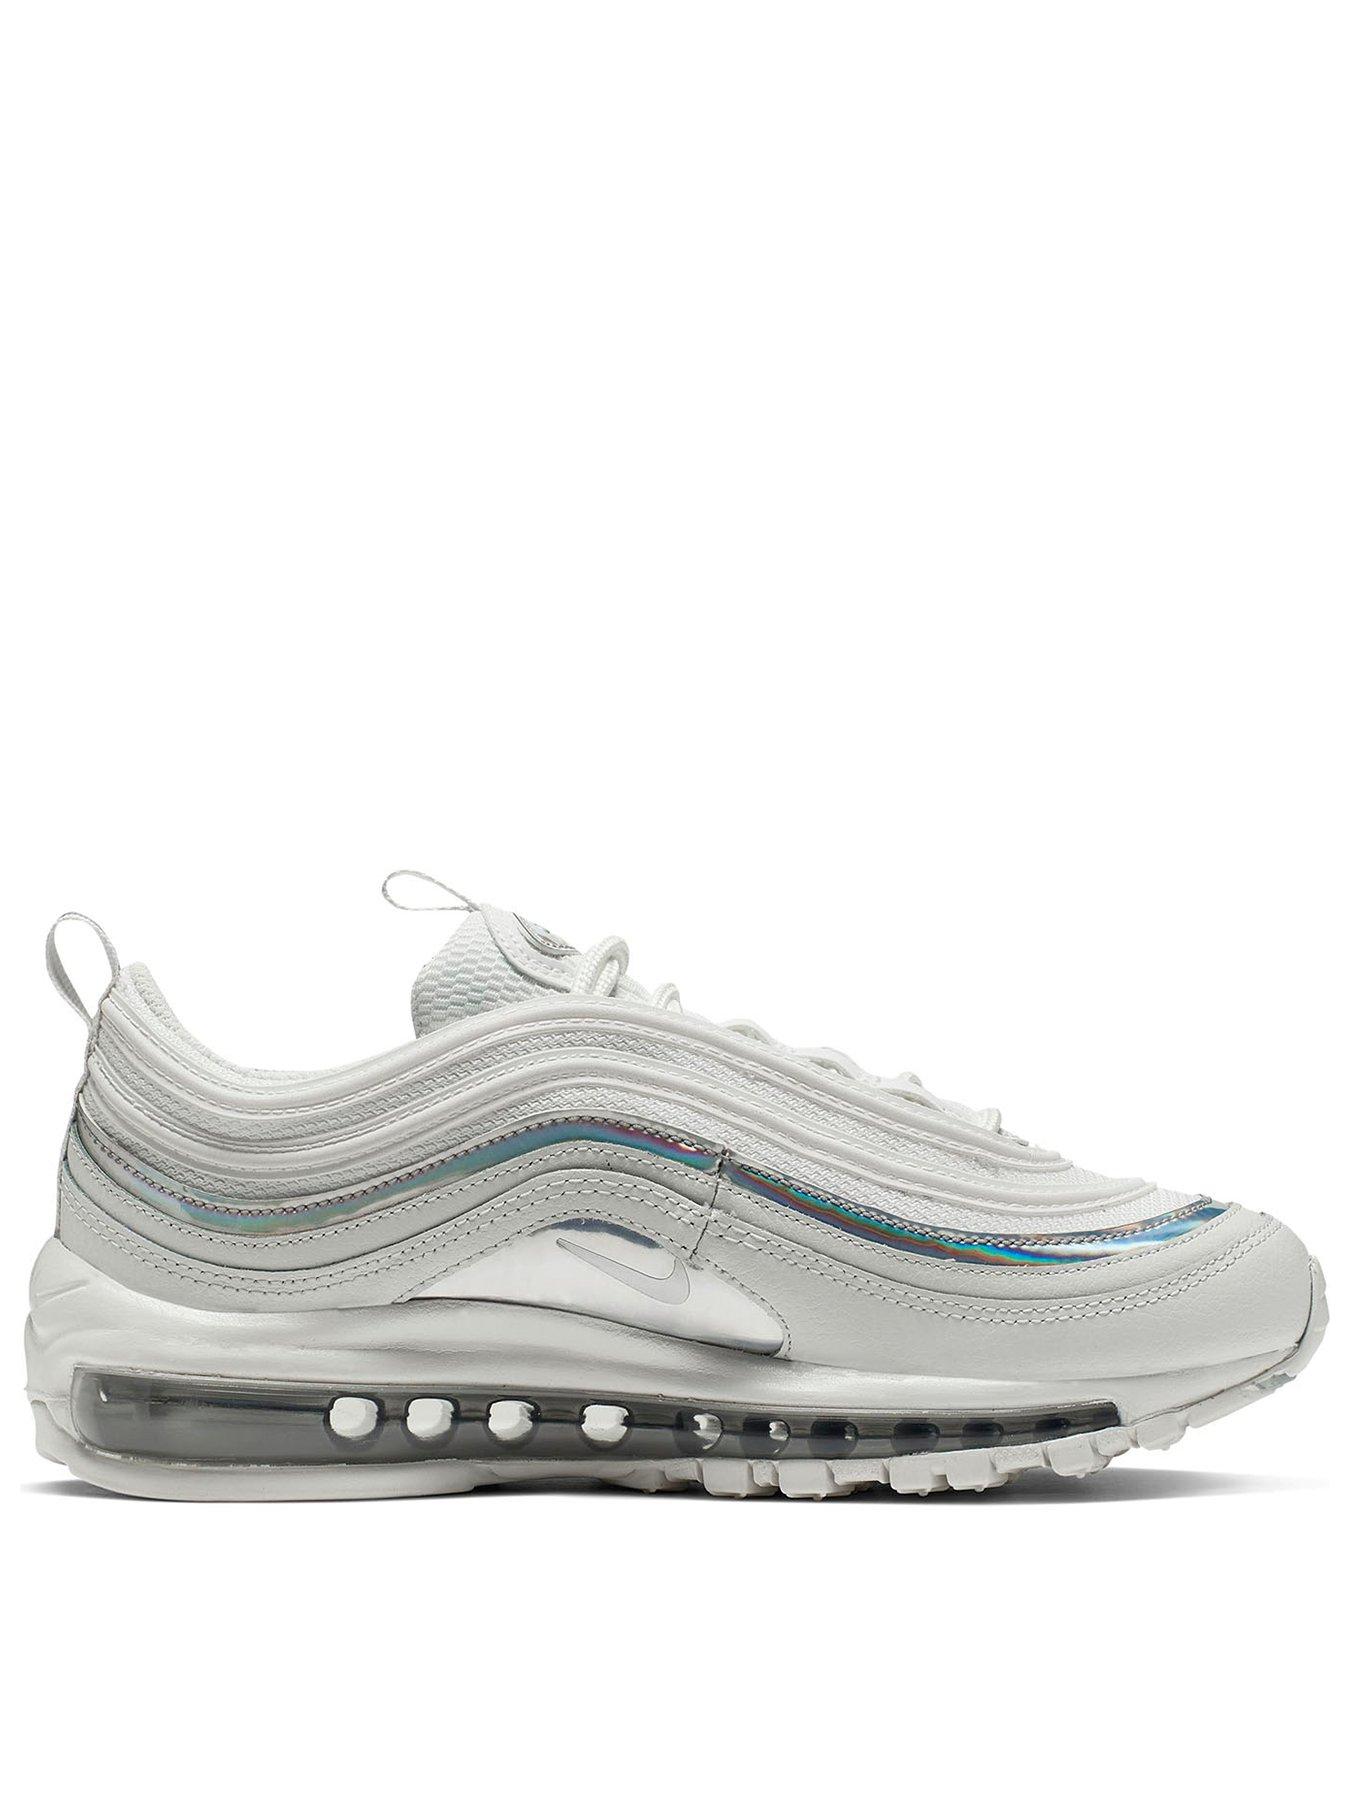 air max 97 holographic white